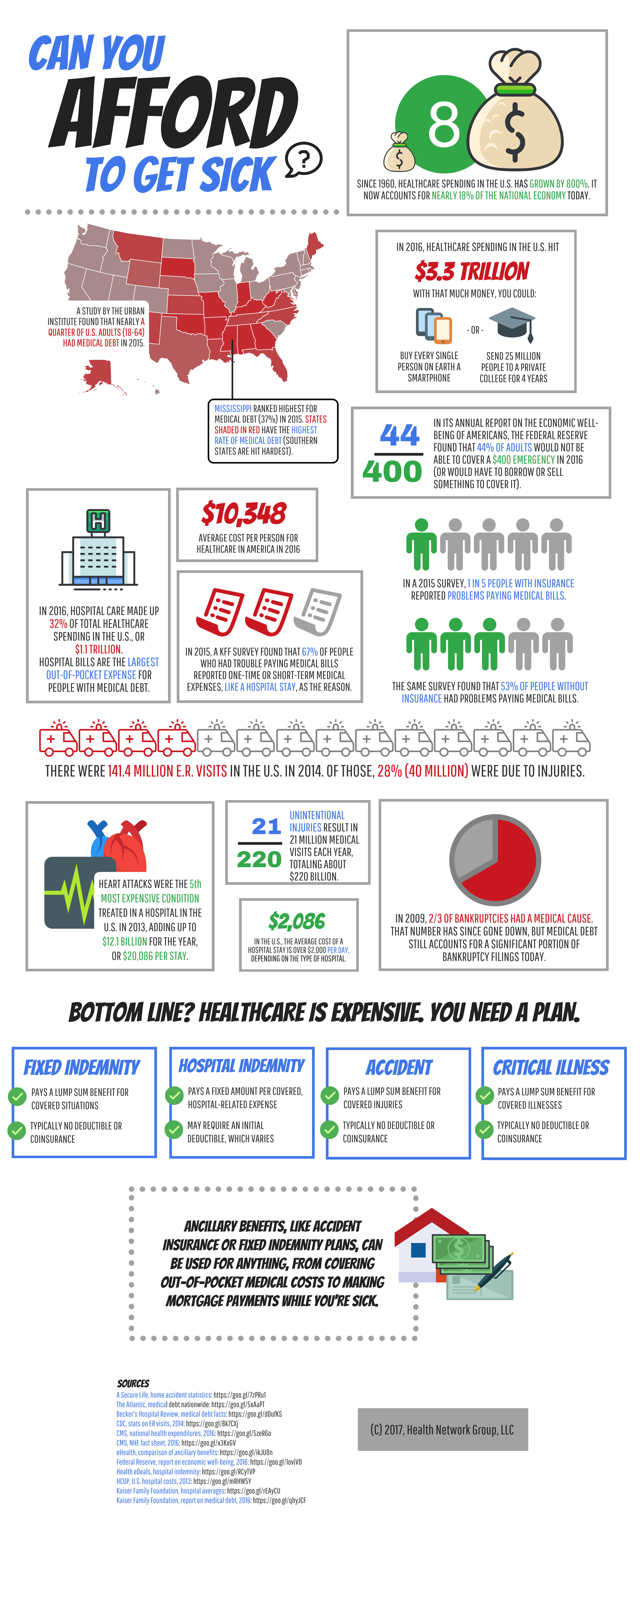 Can you afford to get sick? - Infographic